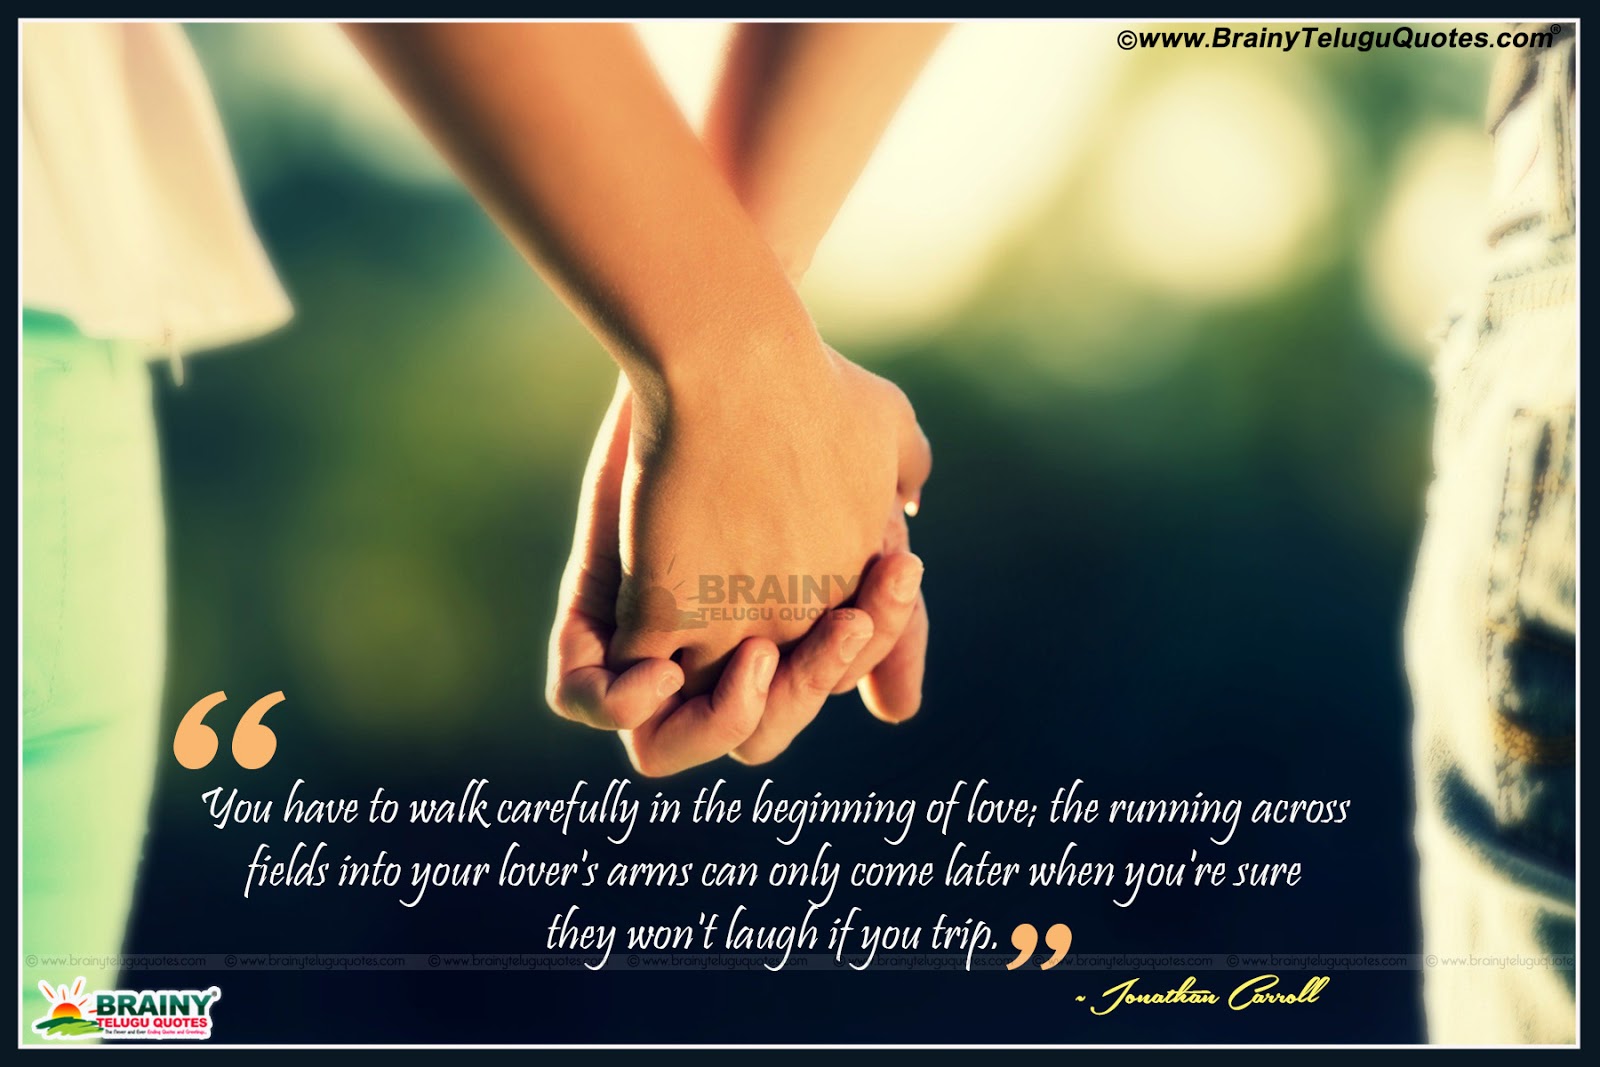 Sweet Love Quotes in English for lovers | BrainyTeluguQuotes.comTelugu